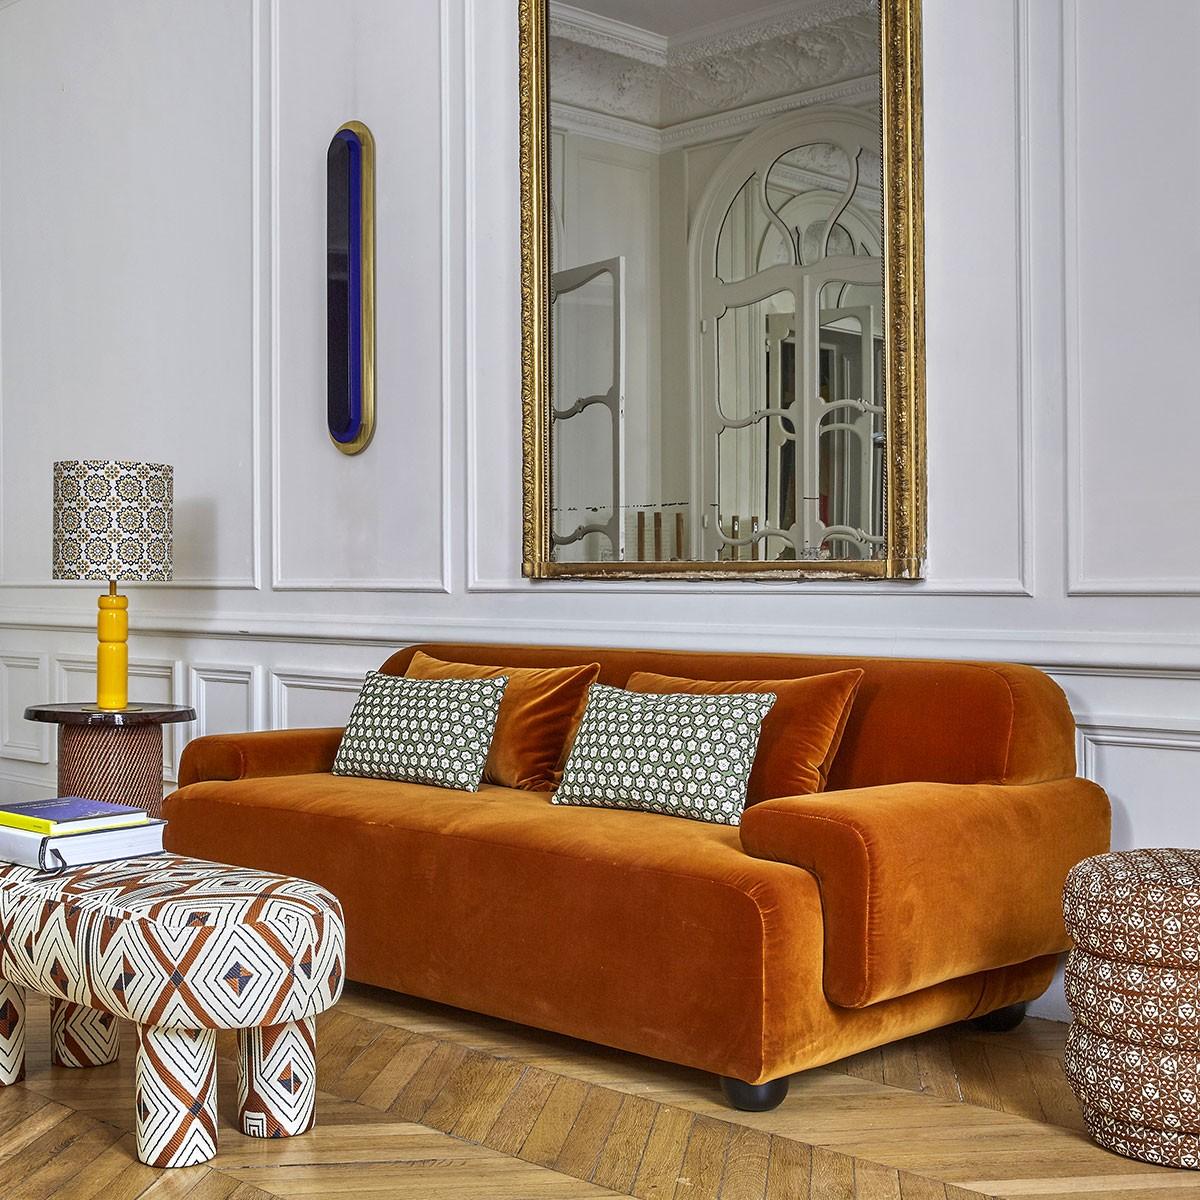 Popus Editions Lena 2.5 seater sofa in orange Verone velvet upholstery

It looks like it's straight out of a movie, with its generous curves and wide armrests. It is a real invitation to spend long Sundays with the family, comfortably seated in